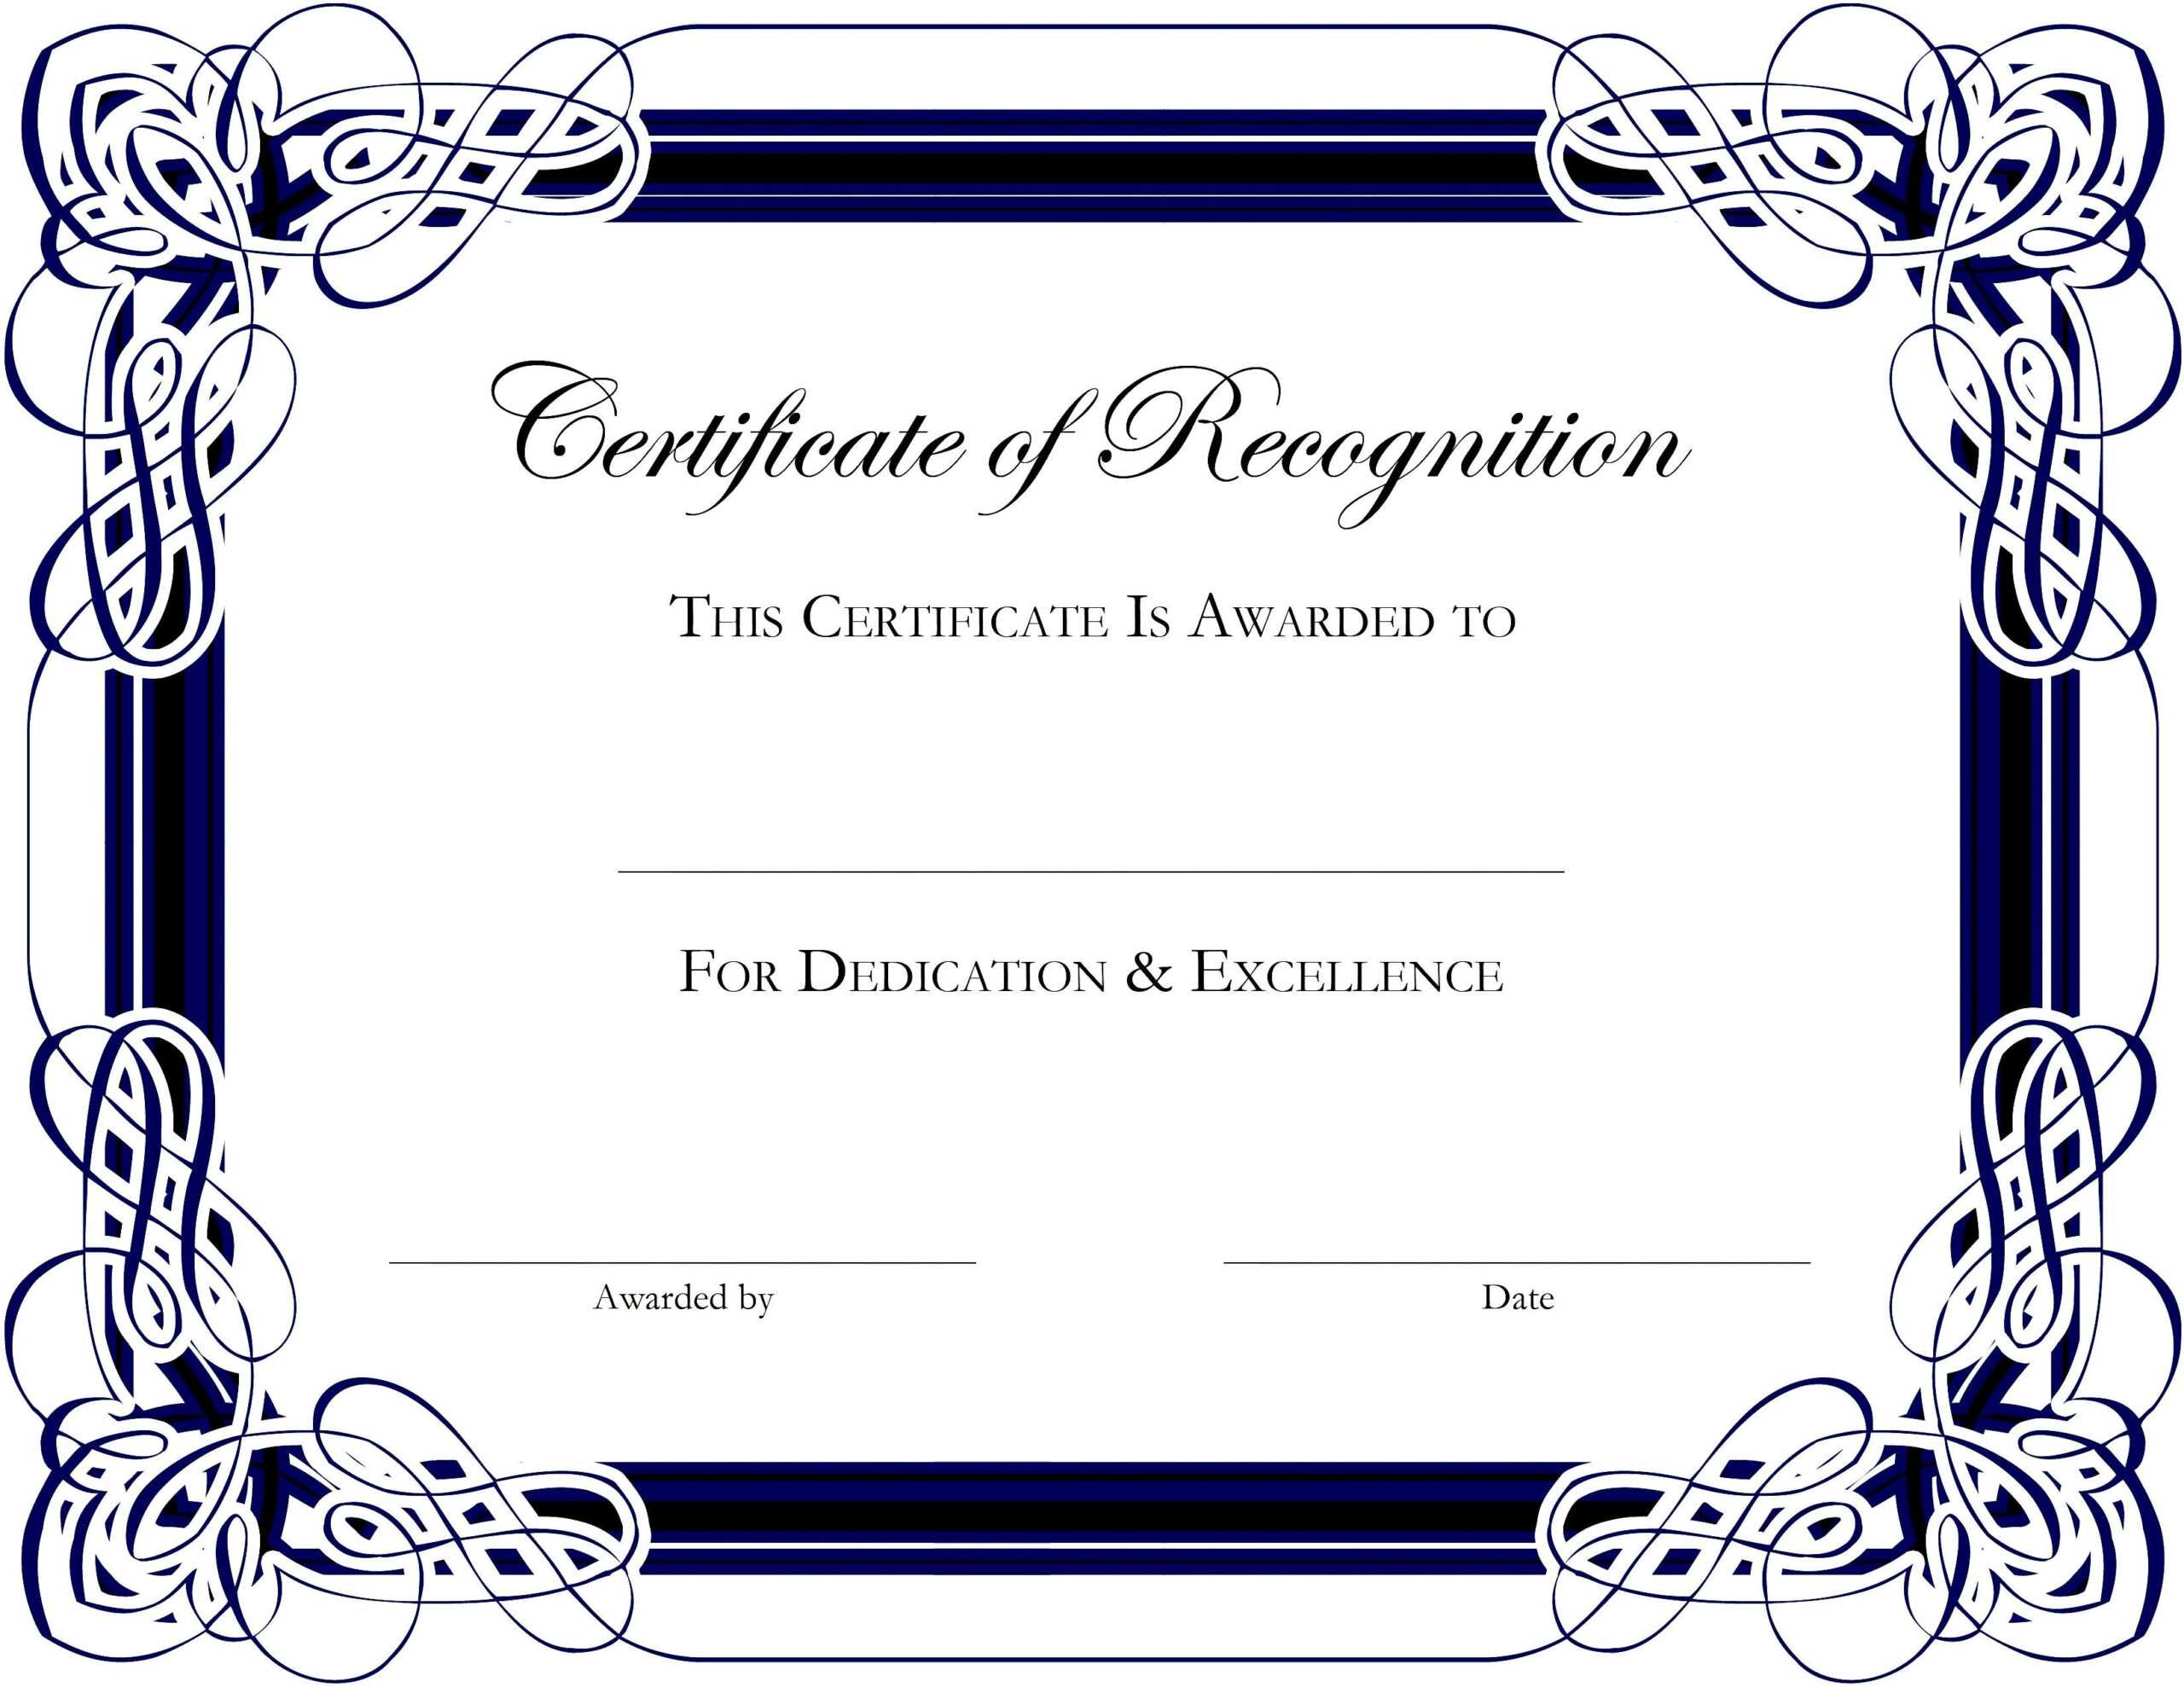 Award Templates For Microsoft Publisher | Besttemplate123 Within Hayes Certificate Templates